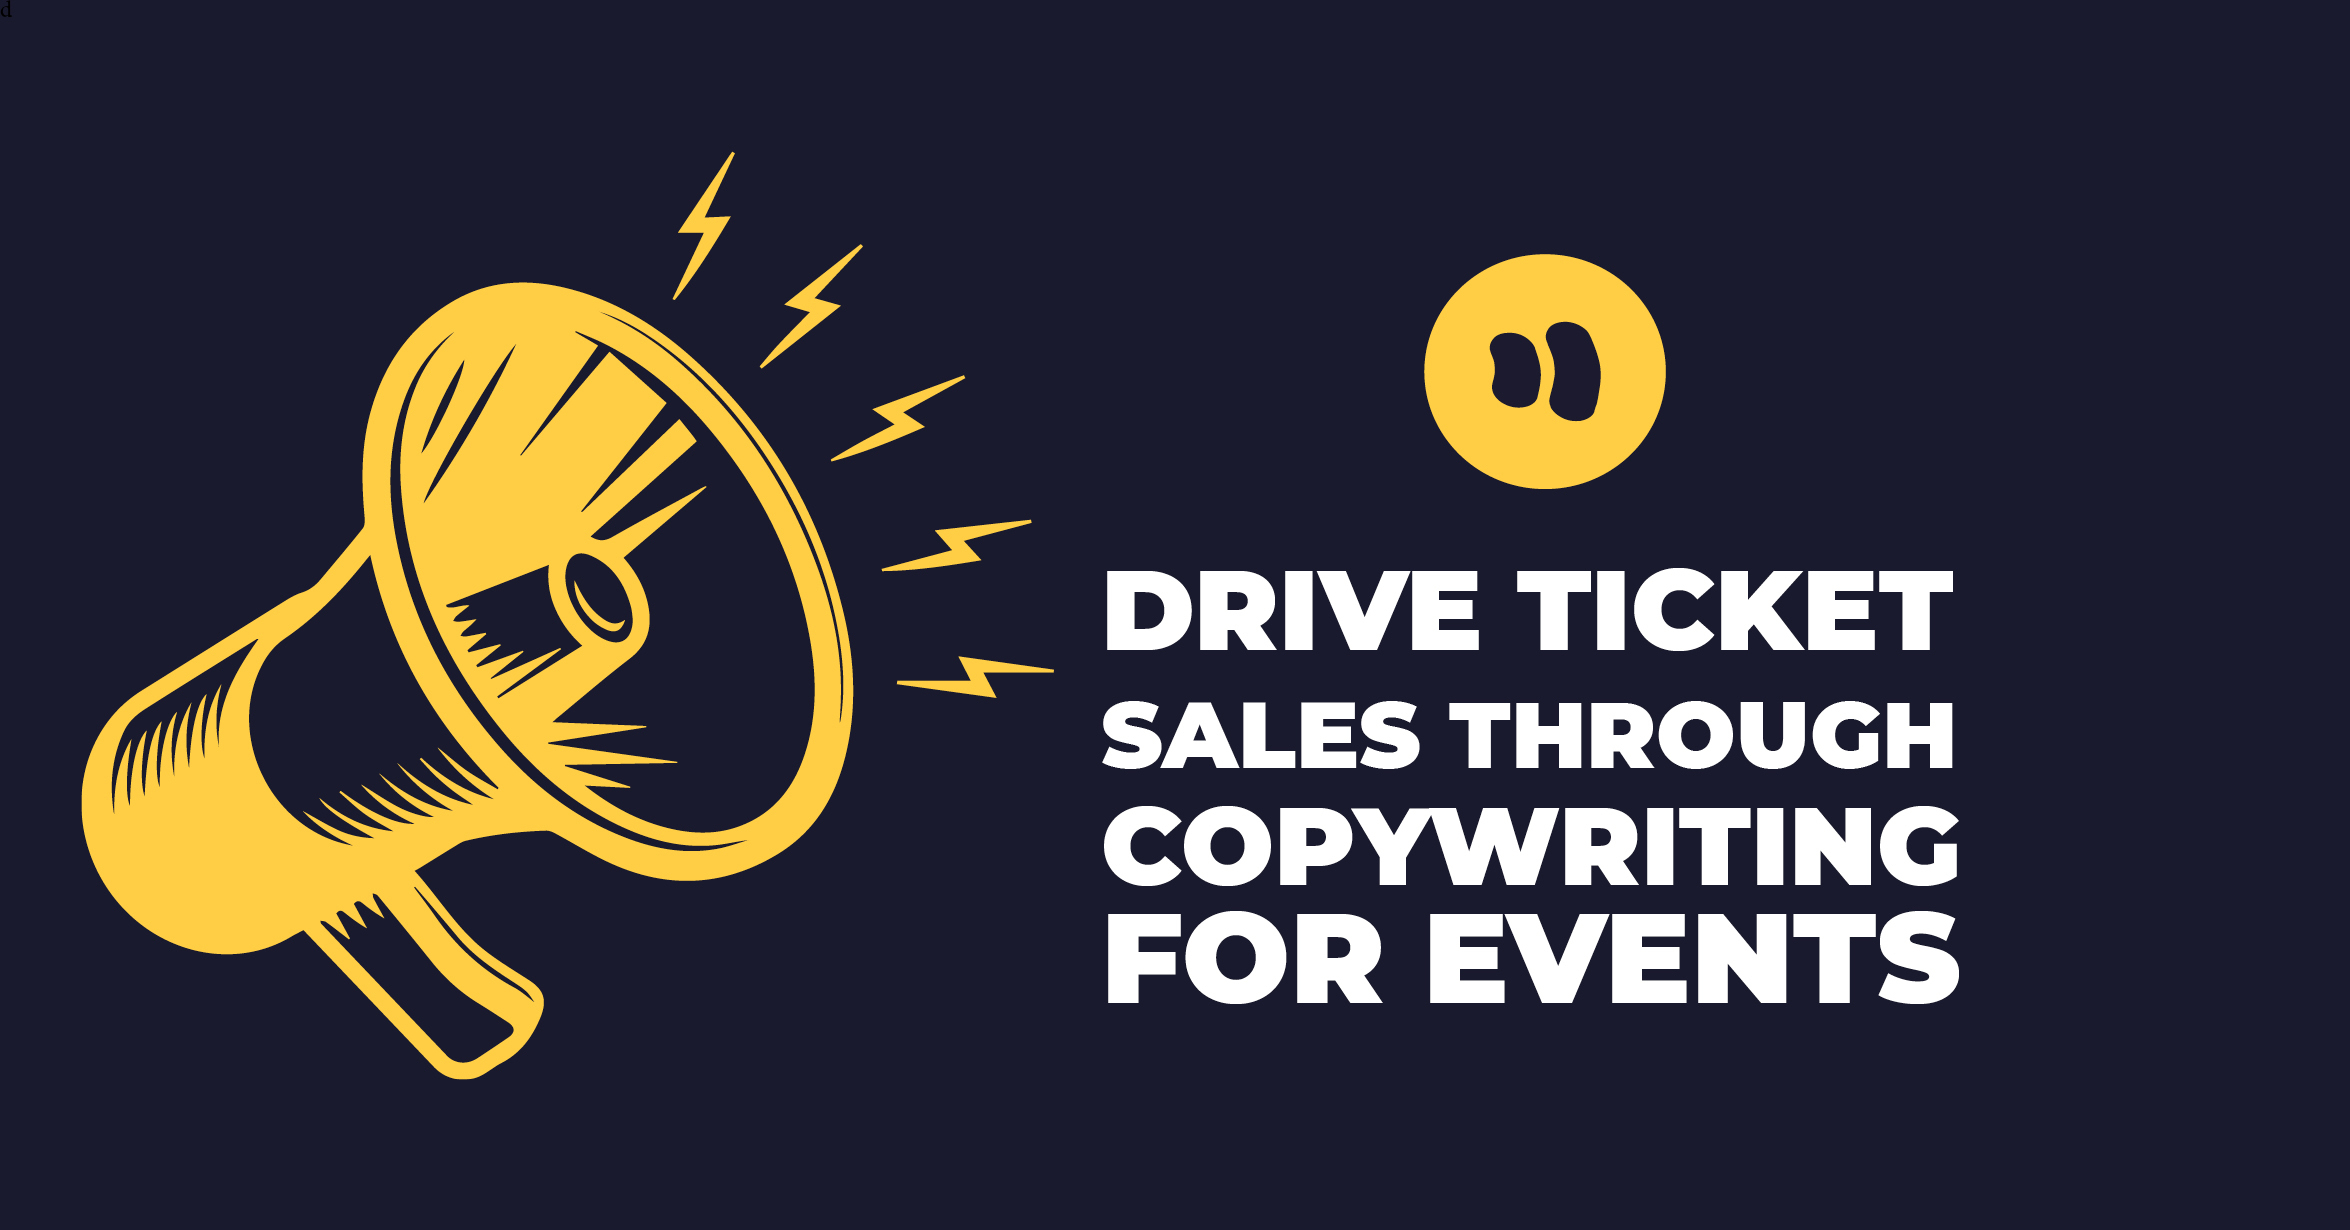 6 Ways to Drive Ticket Sales Through Copywriting for Events